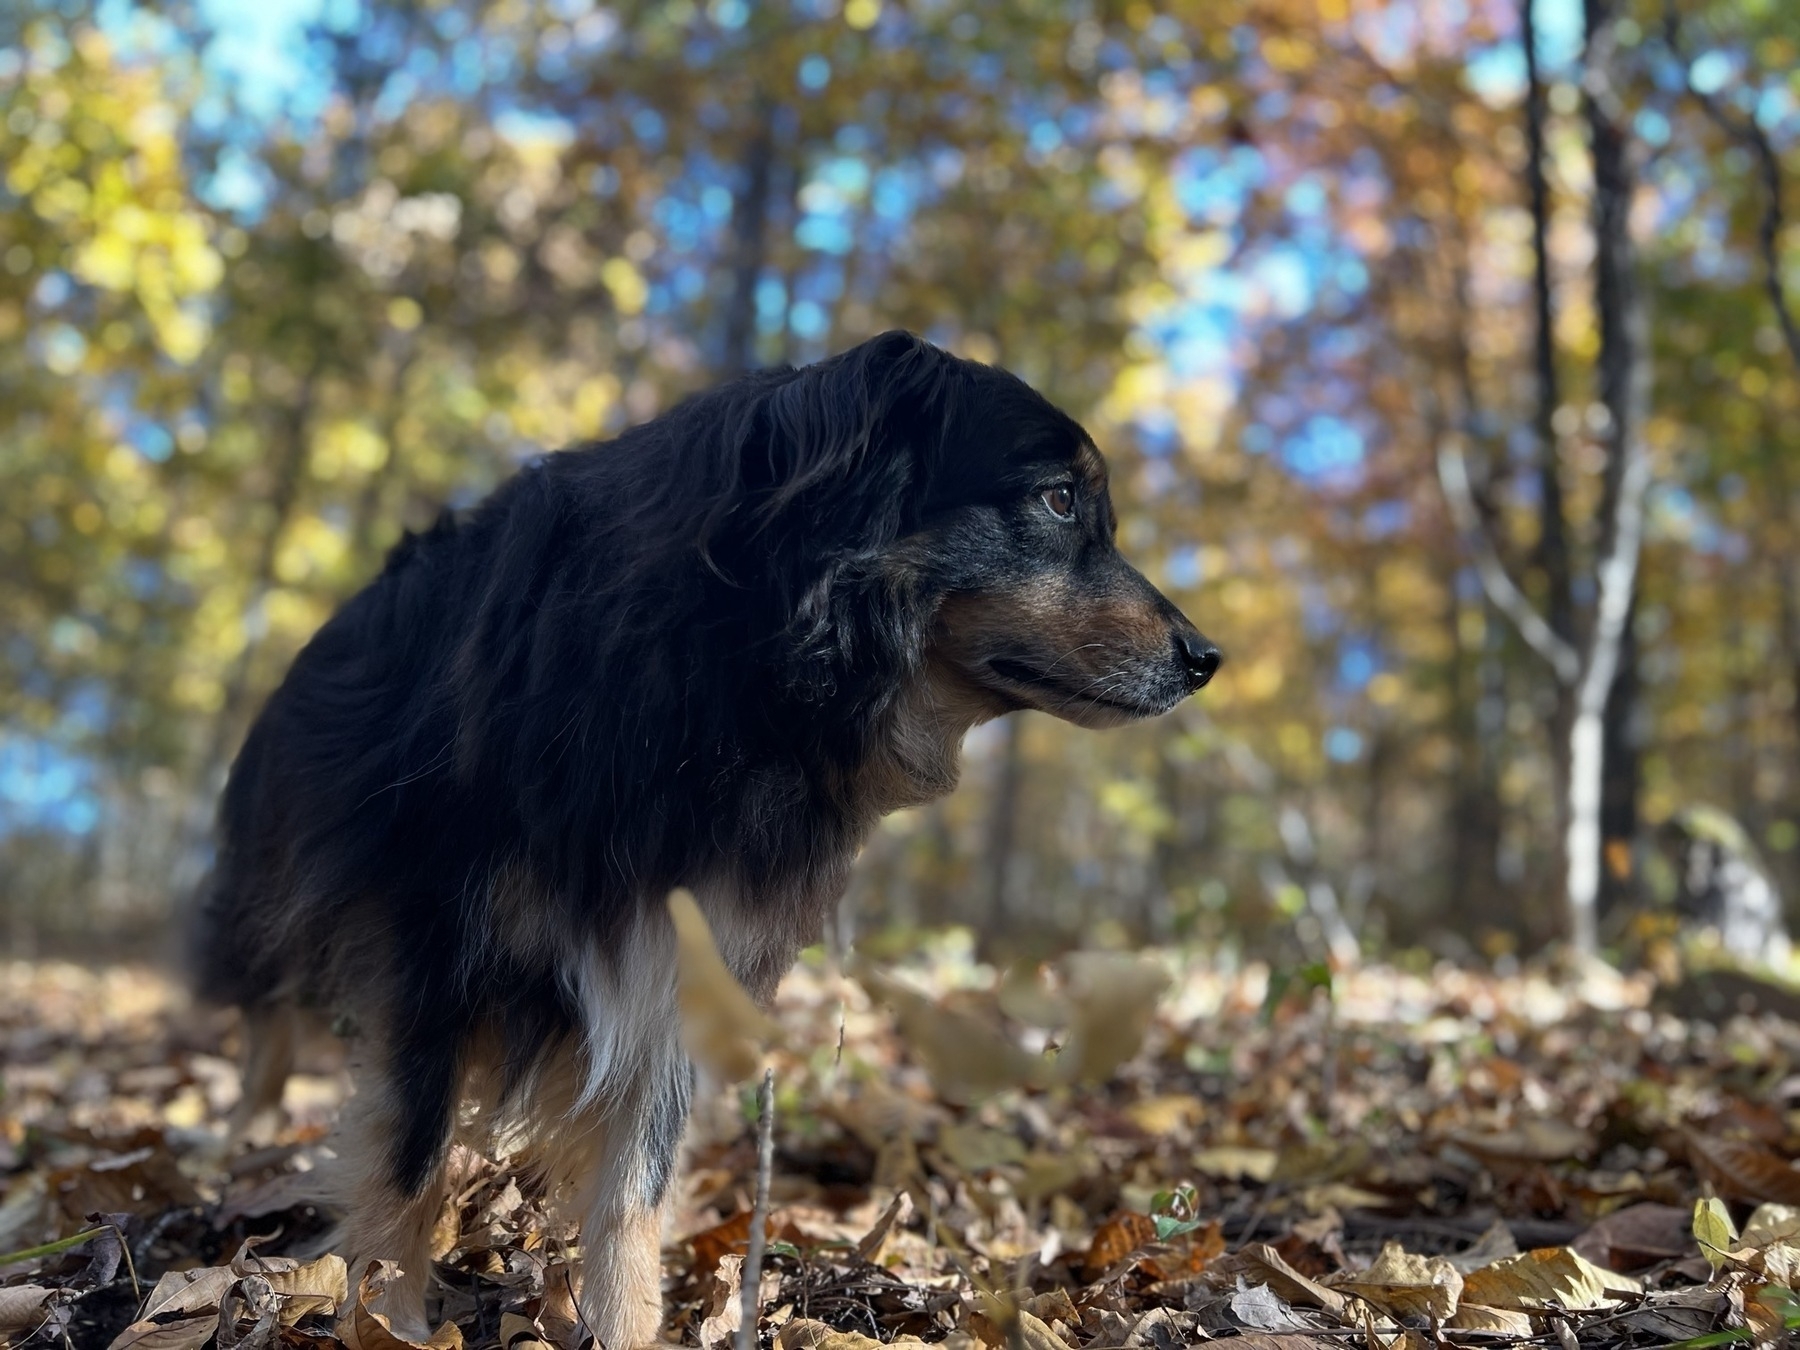 A black haired dog on a walk in the woods in the fall. The foliage and morning sun give the photo a golden tint.